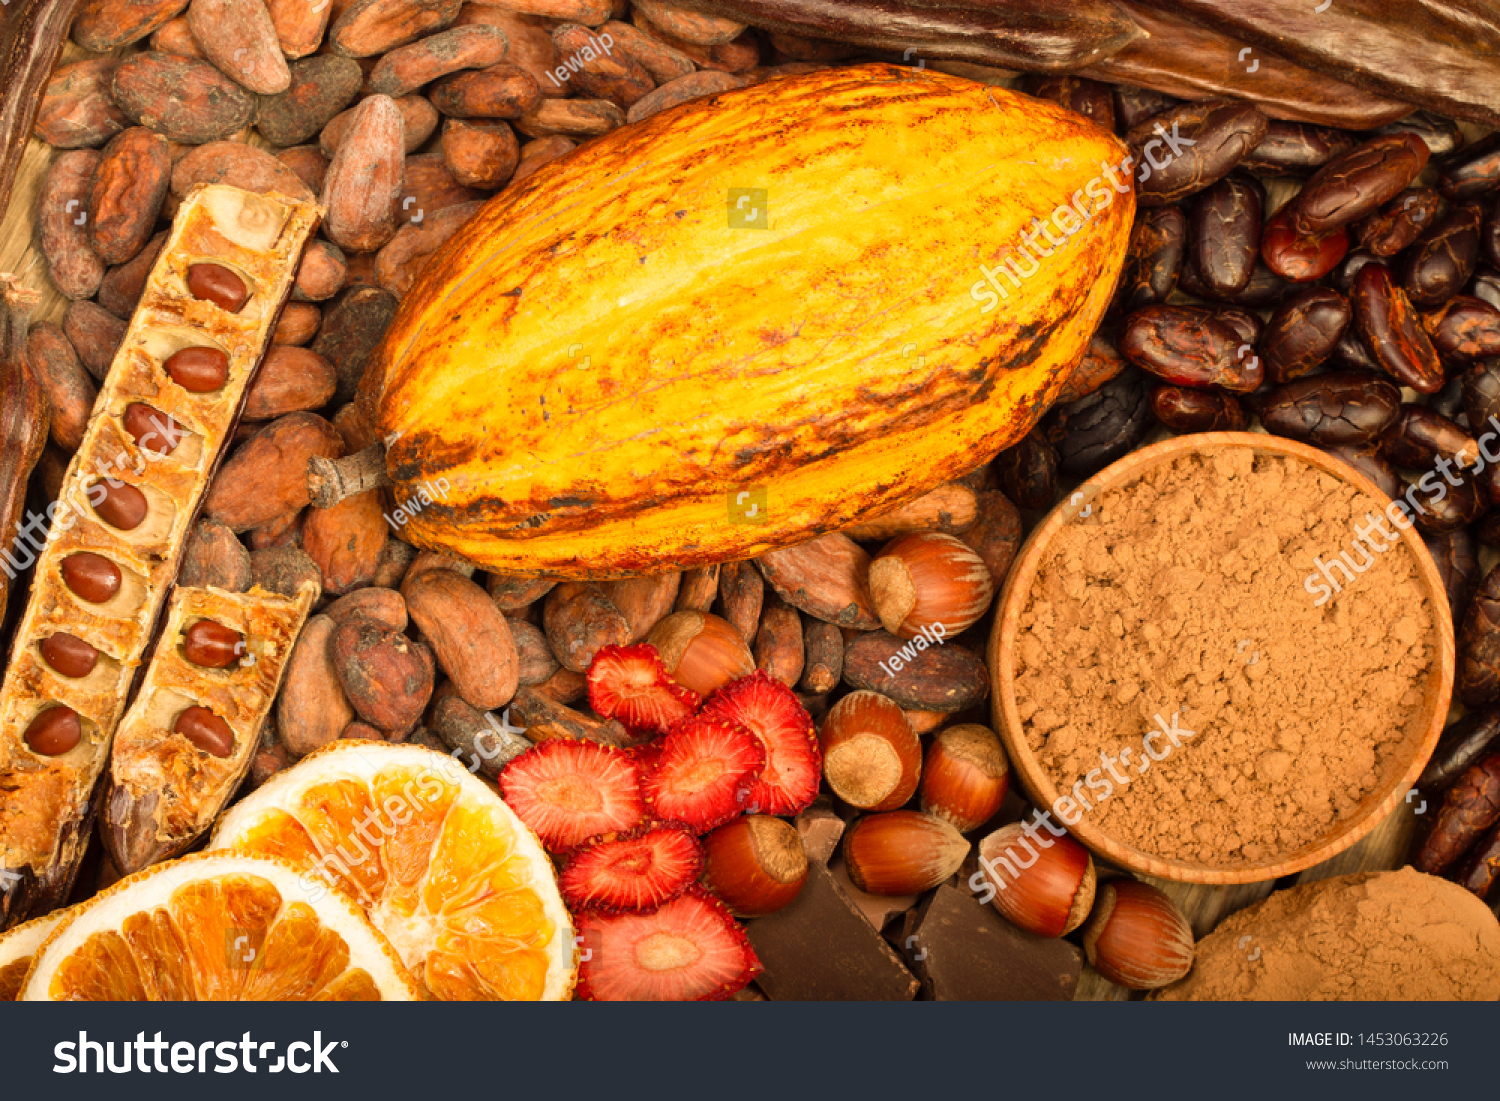 cacao pods, carob pods and dried fruits on wooden background #1453063226